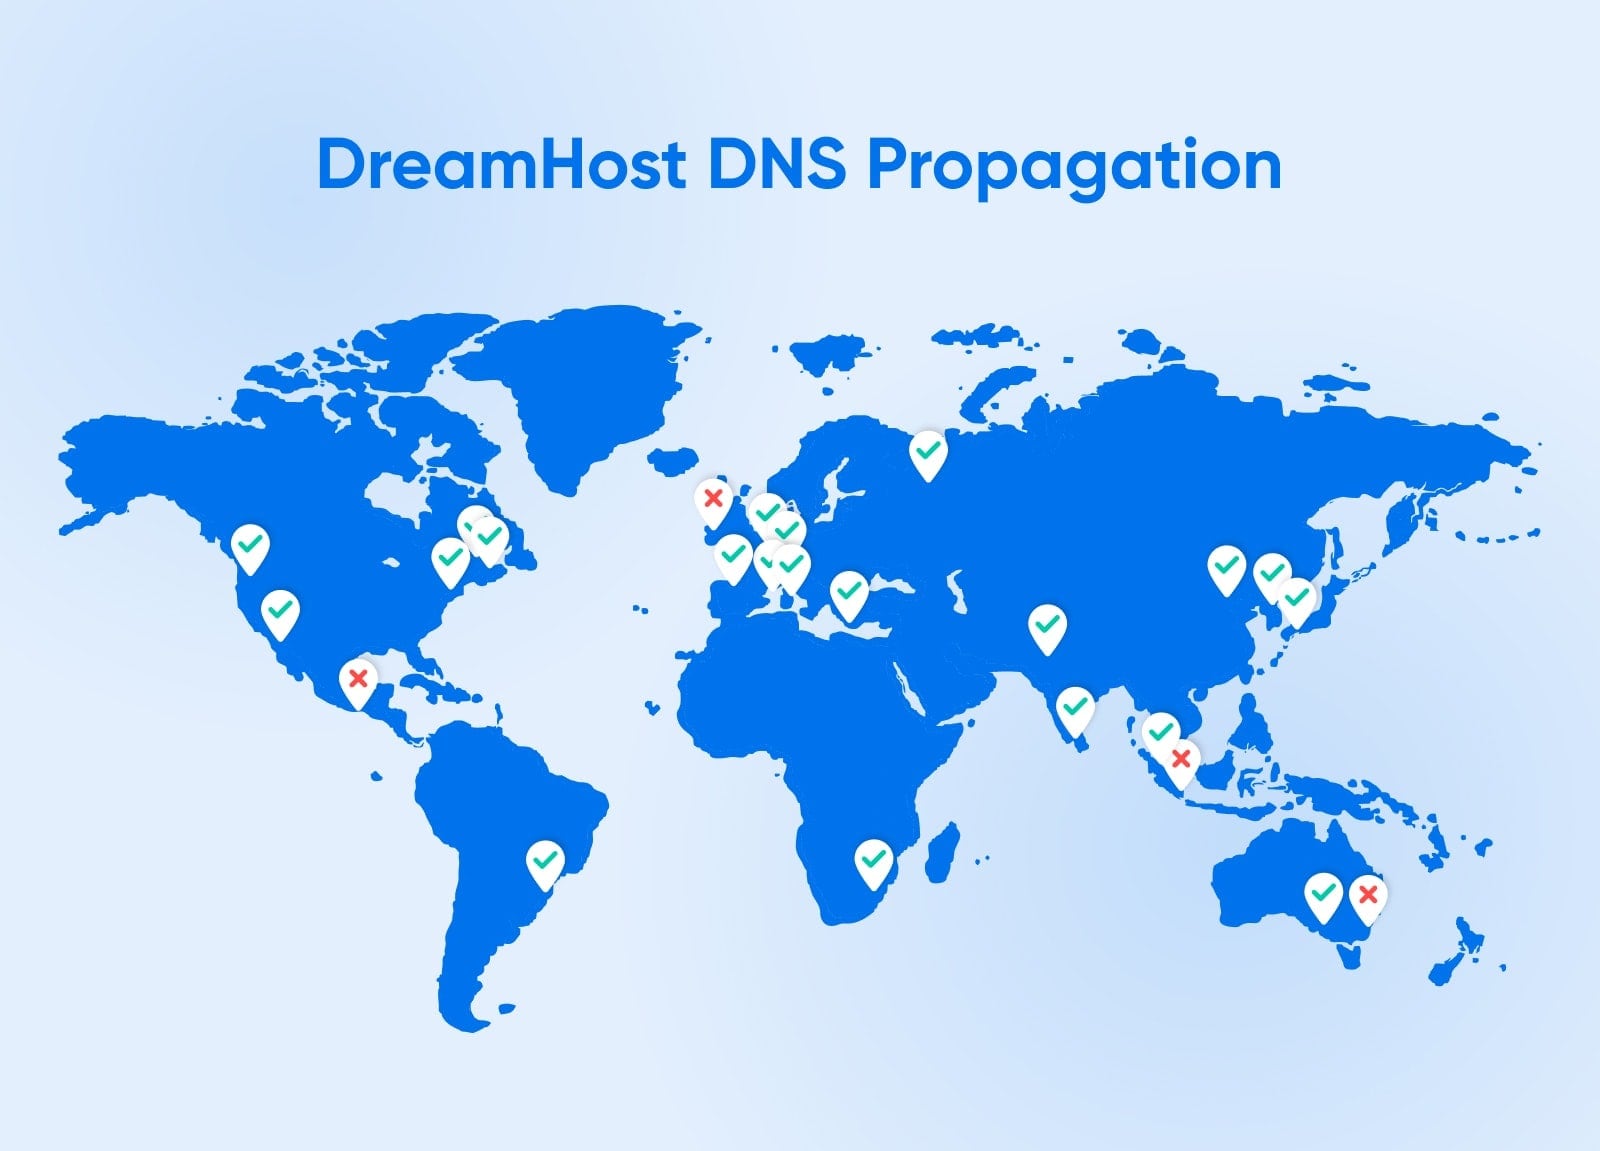 "DreamHost DNS Propagation" graphic showing a world map with locations of nameservers marked by green ticks and red crosses. 